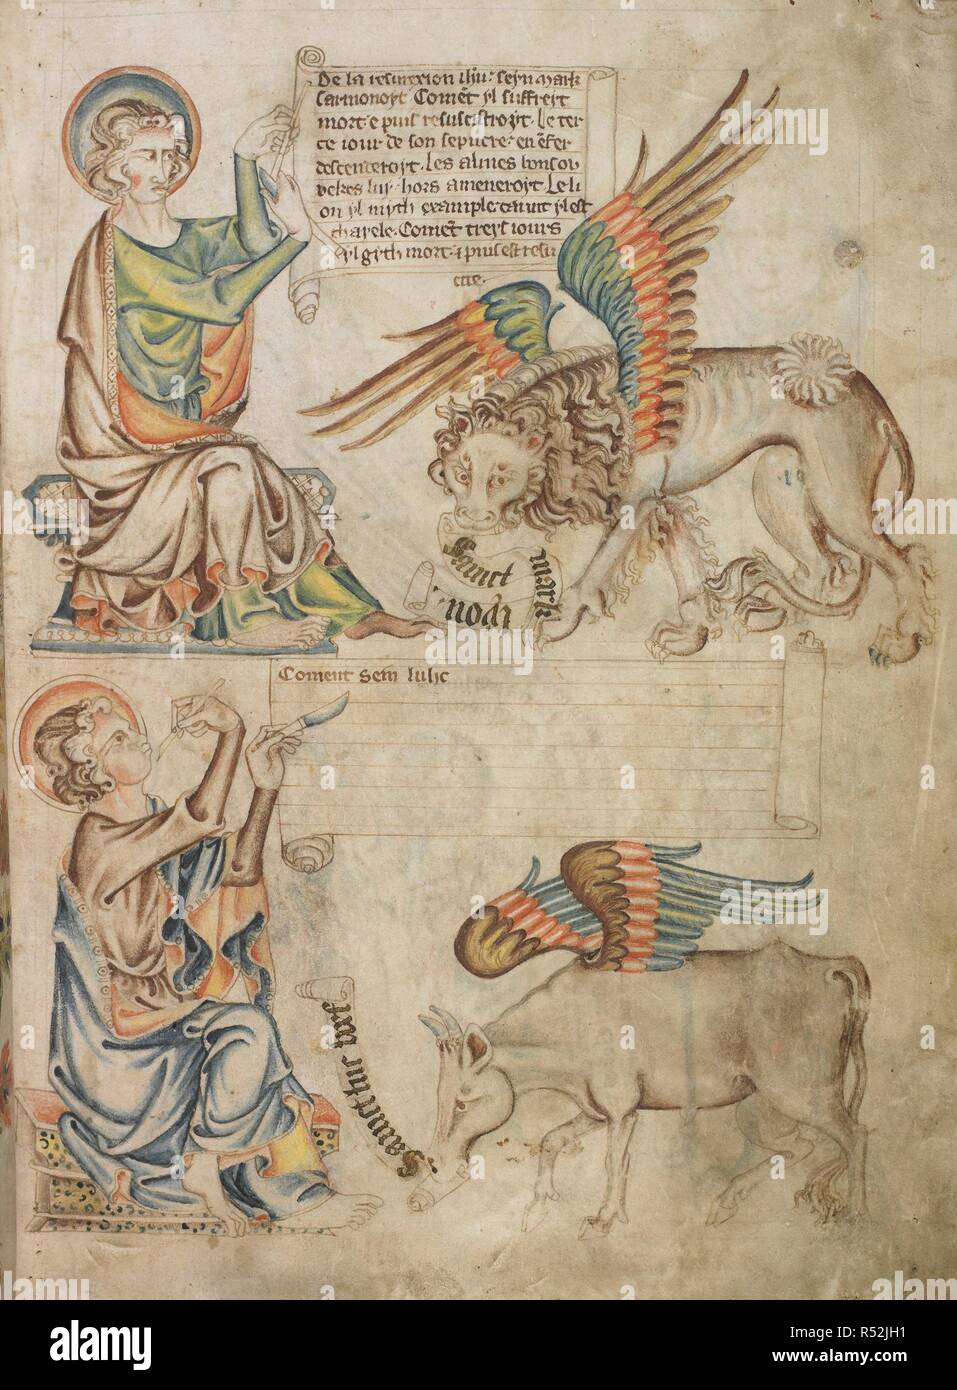 St Mark writing on a scroll with a winged lion holding a small scroll; St Luke starting to write on a scroll, with a winged bull holding a small scroll. Holkham Bible Picture Book. England, circa 1320-1330. Source: Add. 47682, f.11. Stock Photo